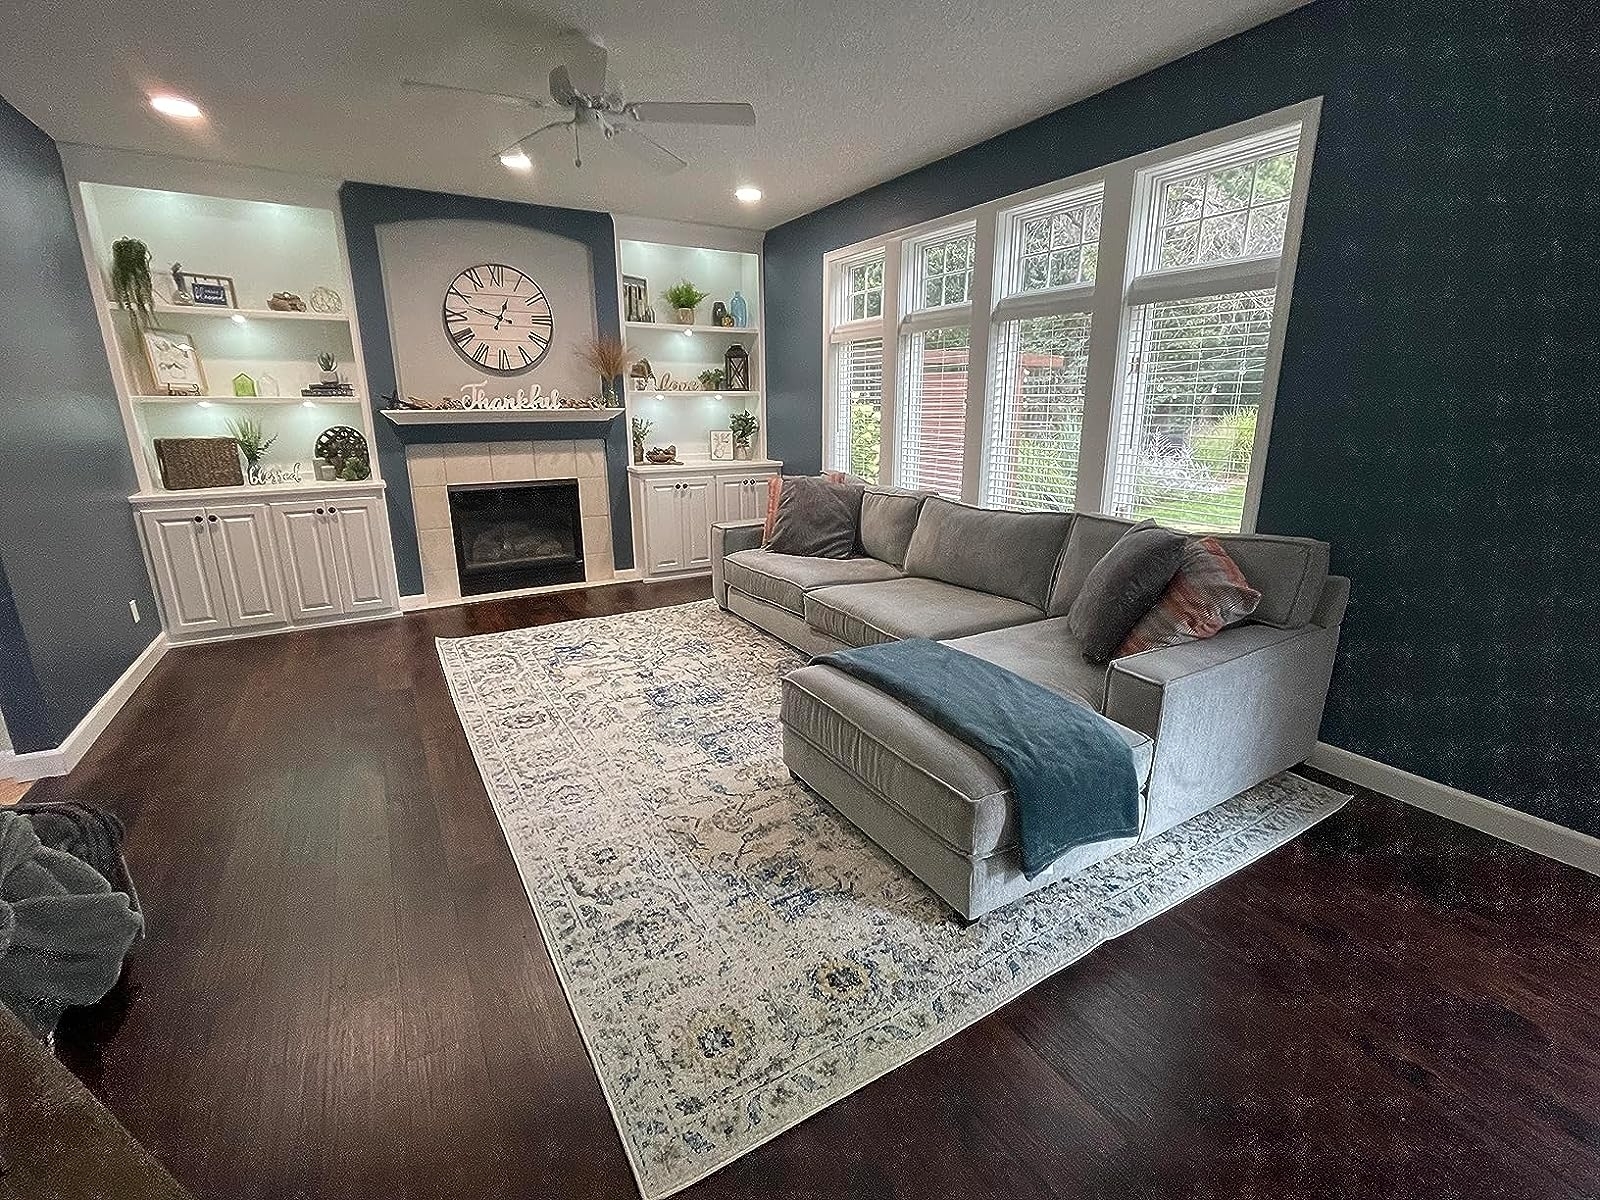 Reviewer image of the rug under a gray sectional in a family room